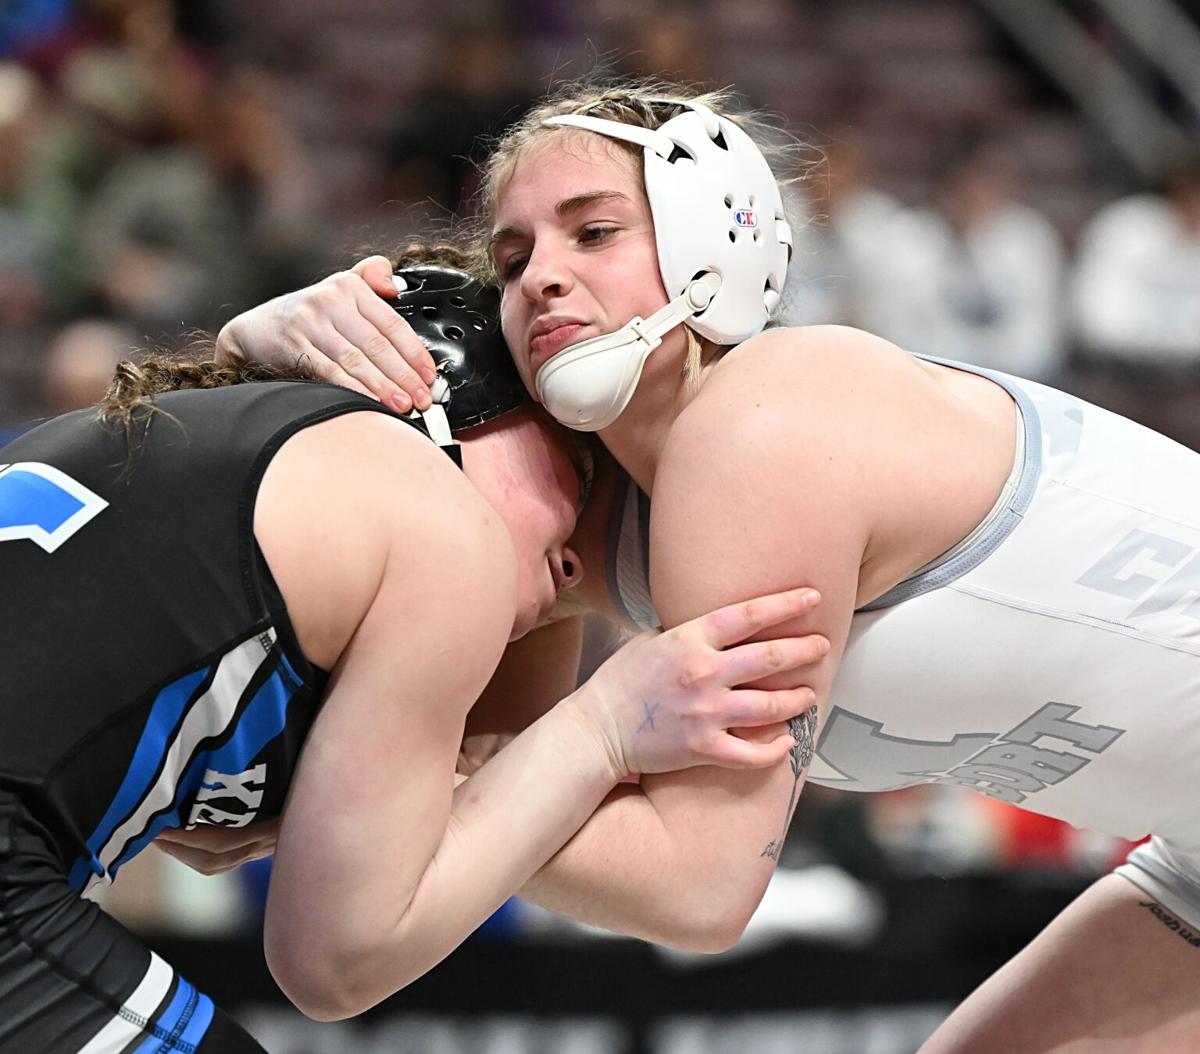 Girls are falling in love with wrestling, the nation's fastest